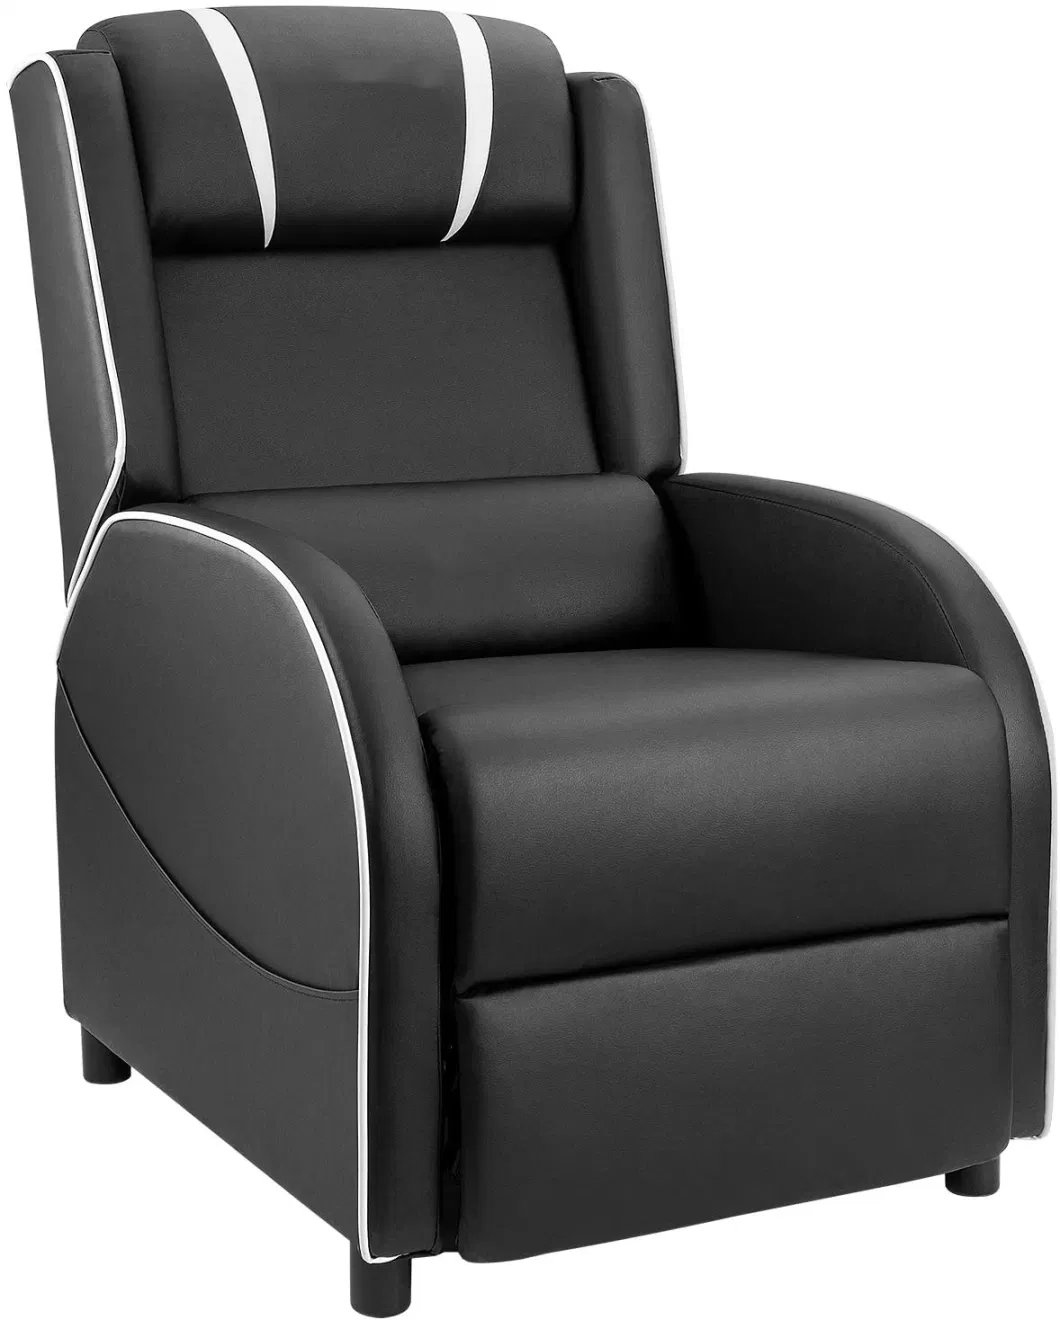 Gaming Recliner Chair Single Living Room Sofa Recliner PU Leather Recliner Seat Home Theater Seating